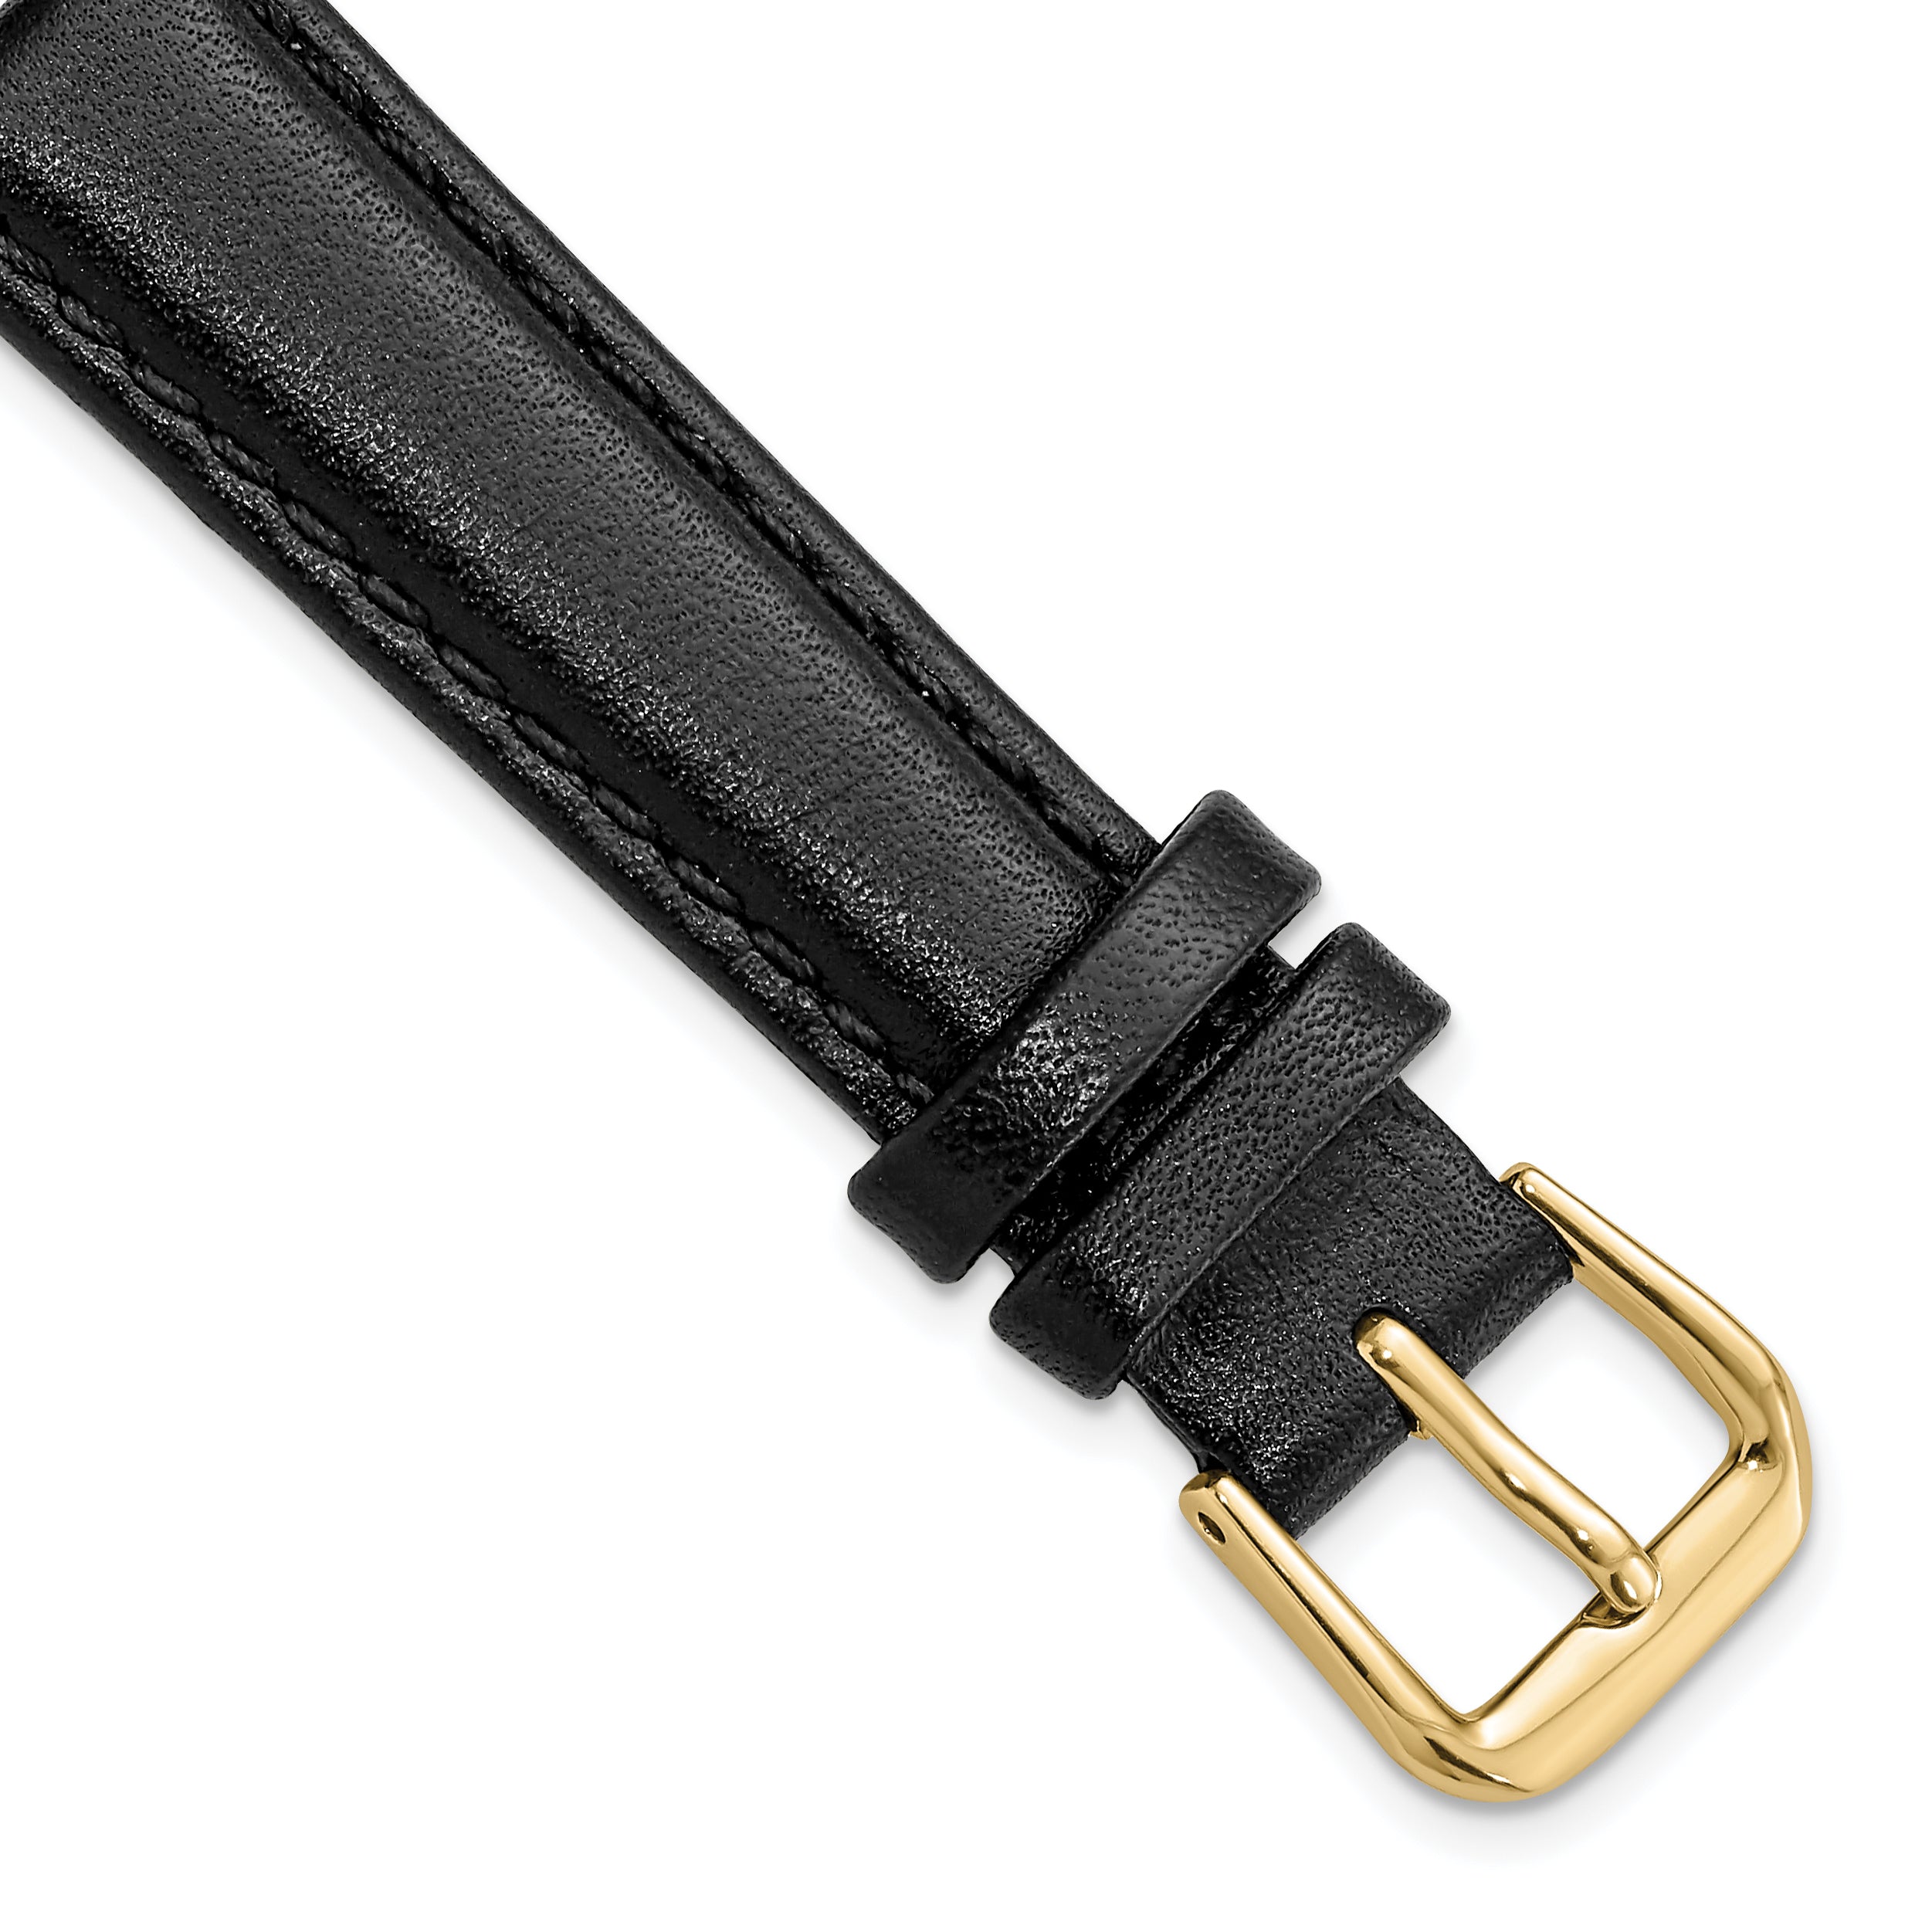 DeBeer 14mm Short Black Smooth Leather with Gold-tone Buckle 6.25 inch Watch Band